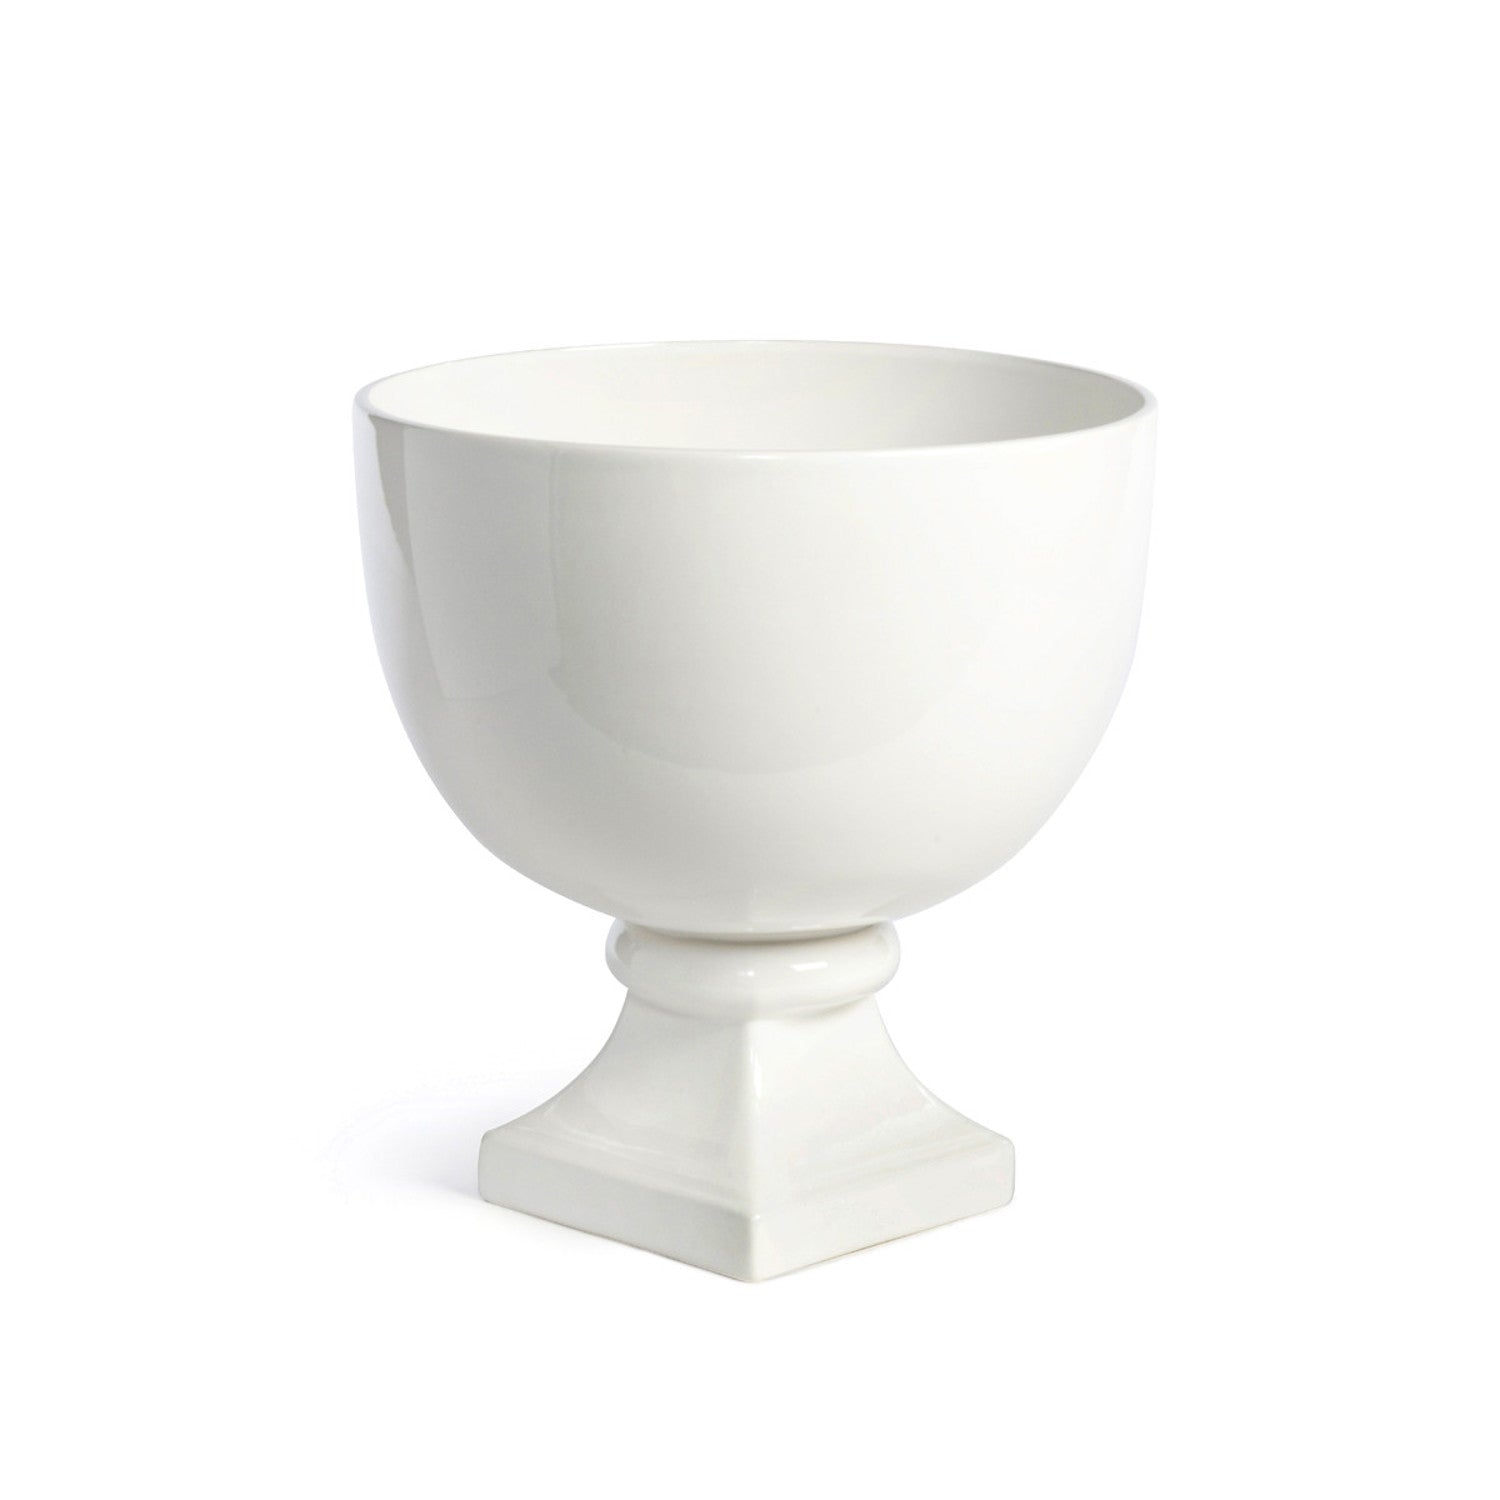 White European ceramic Pedestal Bowls from Park Hill, decorative centerpiece on pedestals, one filled with lemons and flowers, on a striped surface with wooden board.